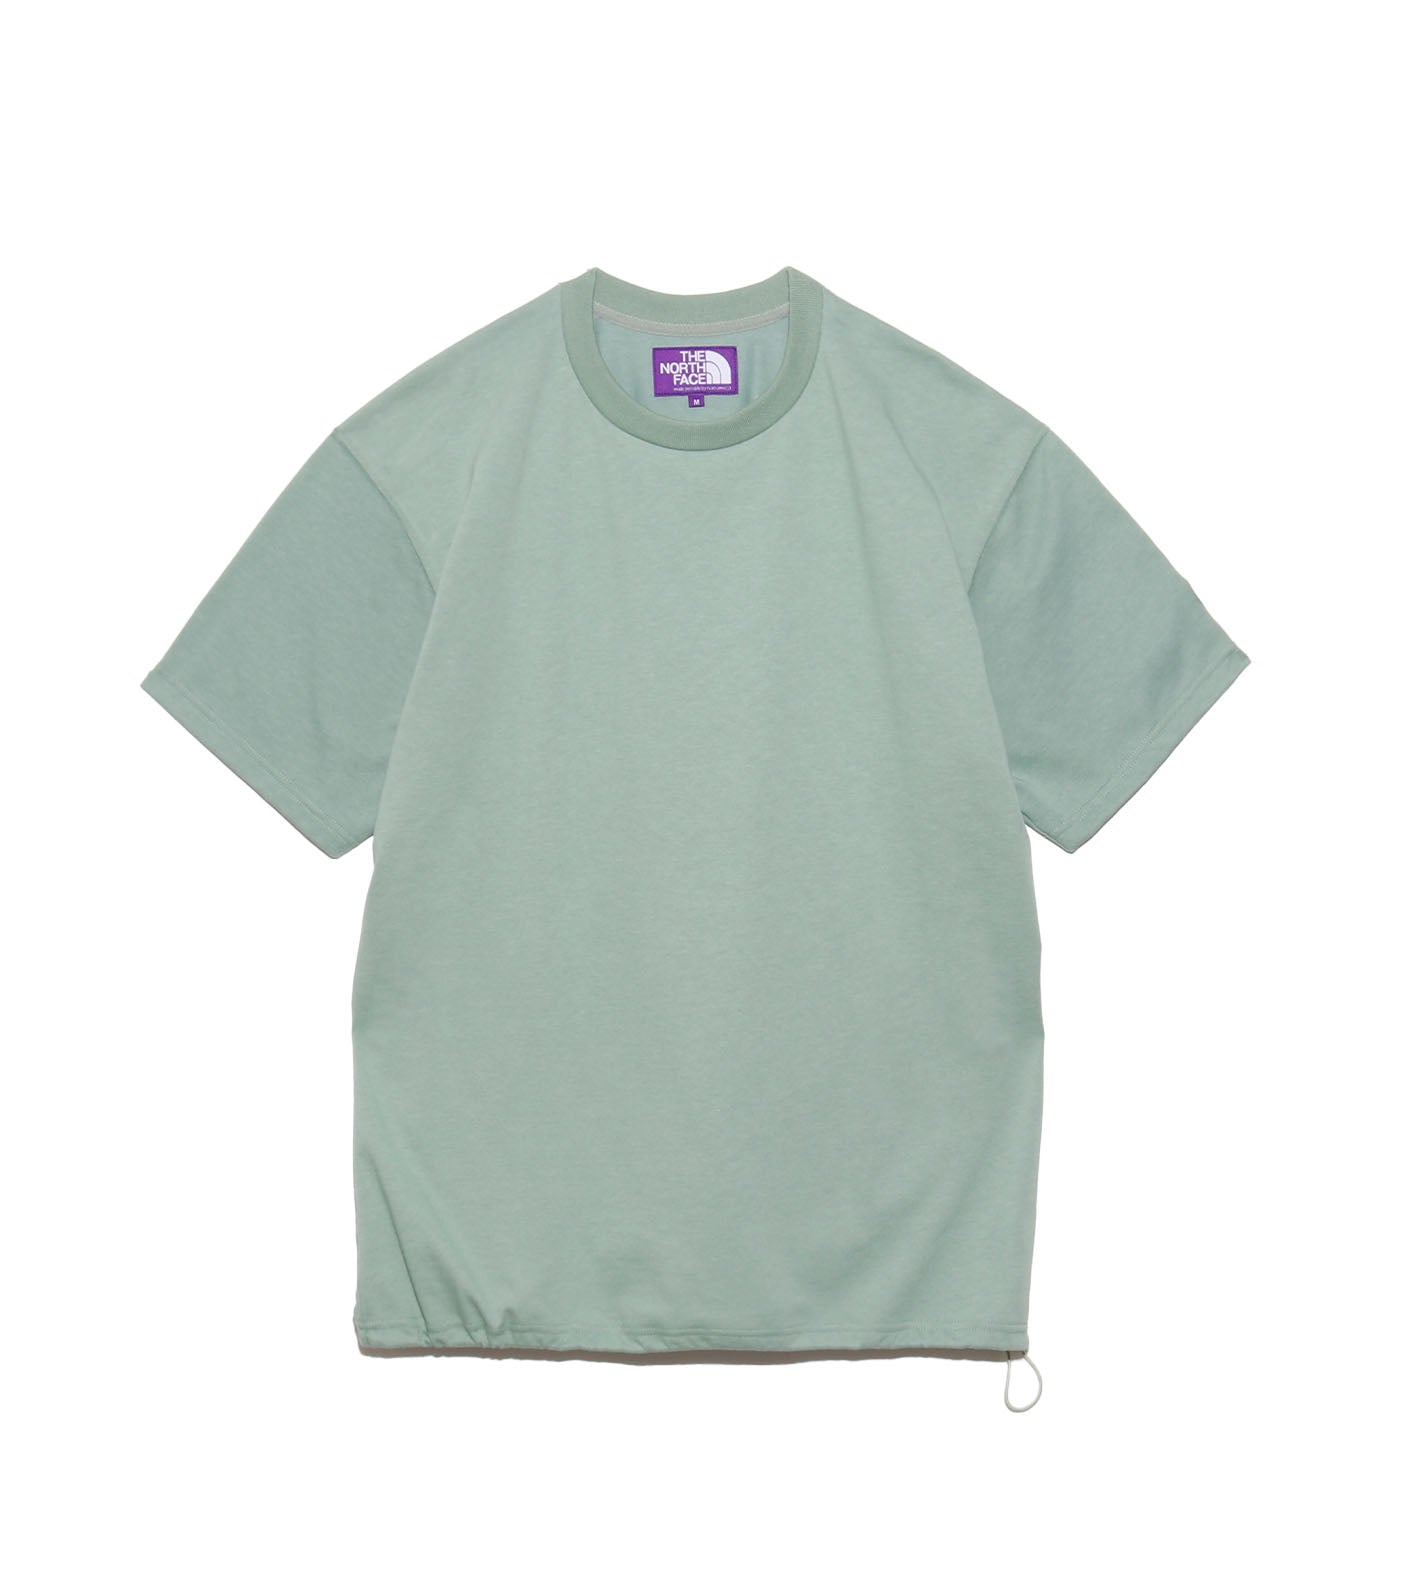 The North Face Flashdry mint green active shirt